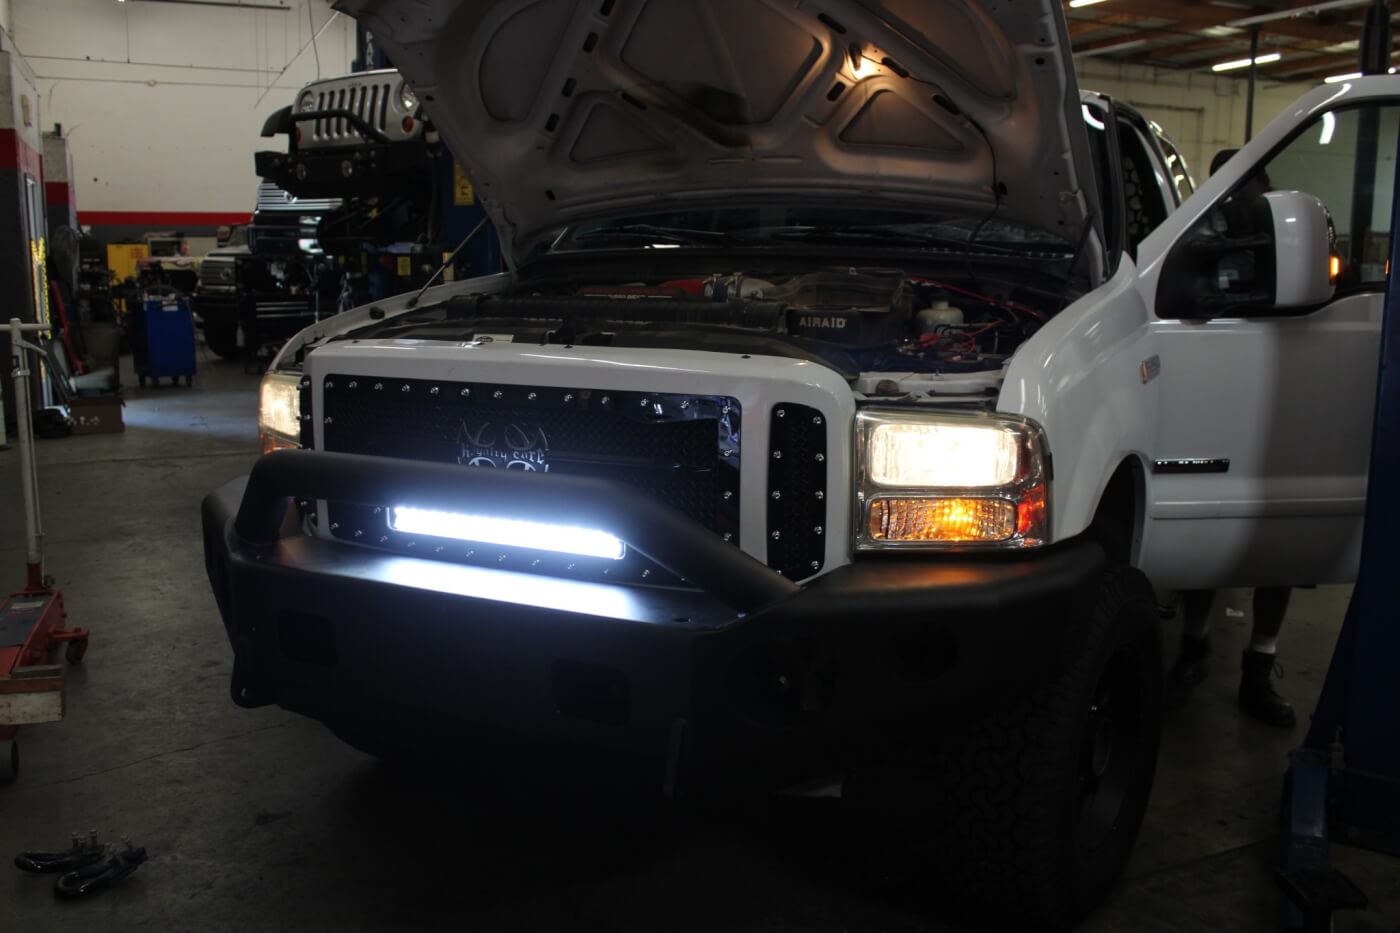 18. A quick check verifies that the Vision X light bar is working and also gives us a glimpse of what the truck will look like after dark with the light bar on. Our installation is wired so that the light bar can only be switched on with the headlights.